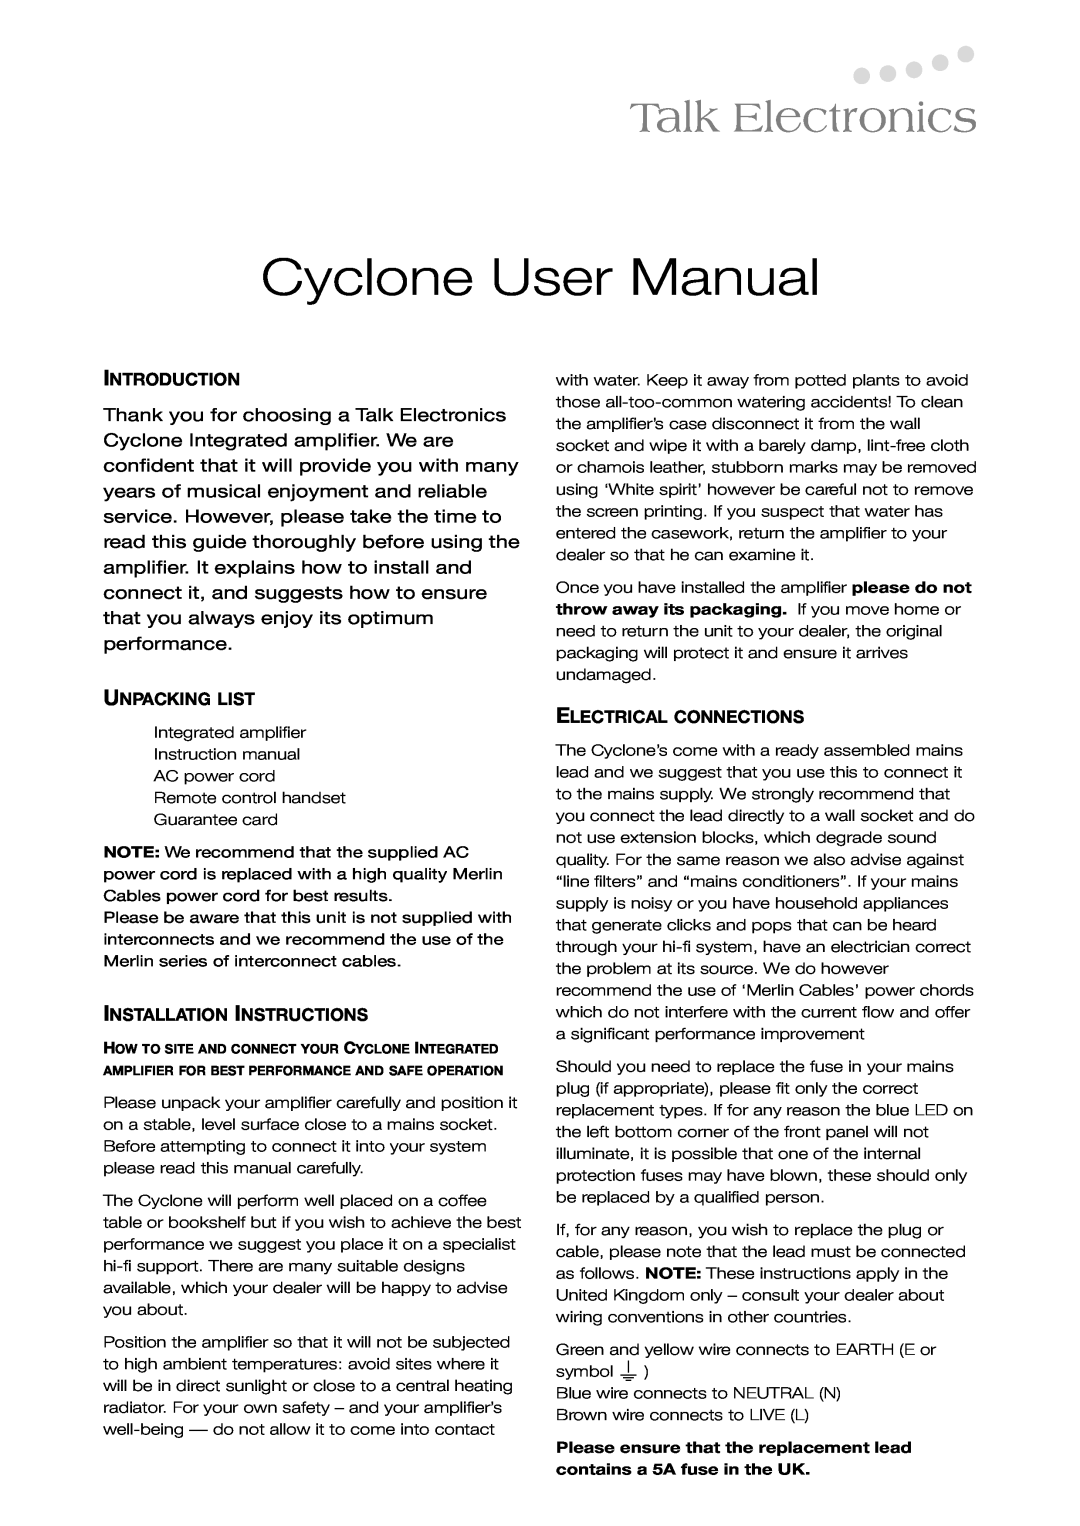 Talk electronic Cyclone Introduction, Unpacking List, Installation Instructions, Electrical Connections, Talk Electronics 